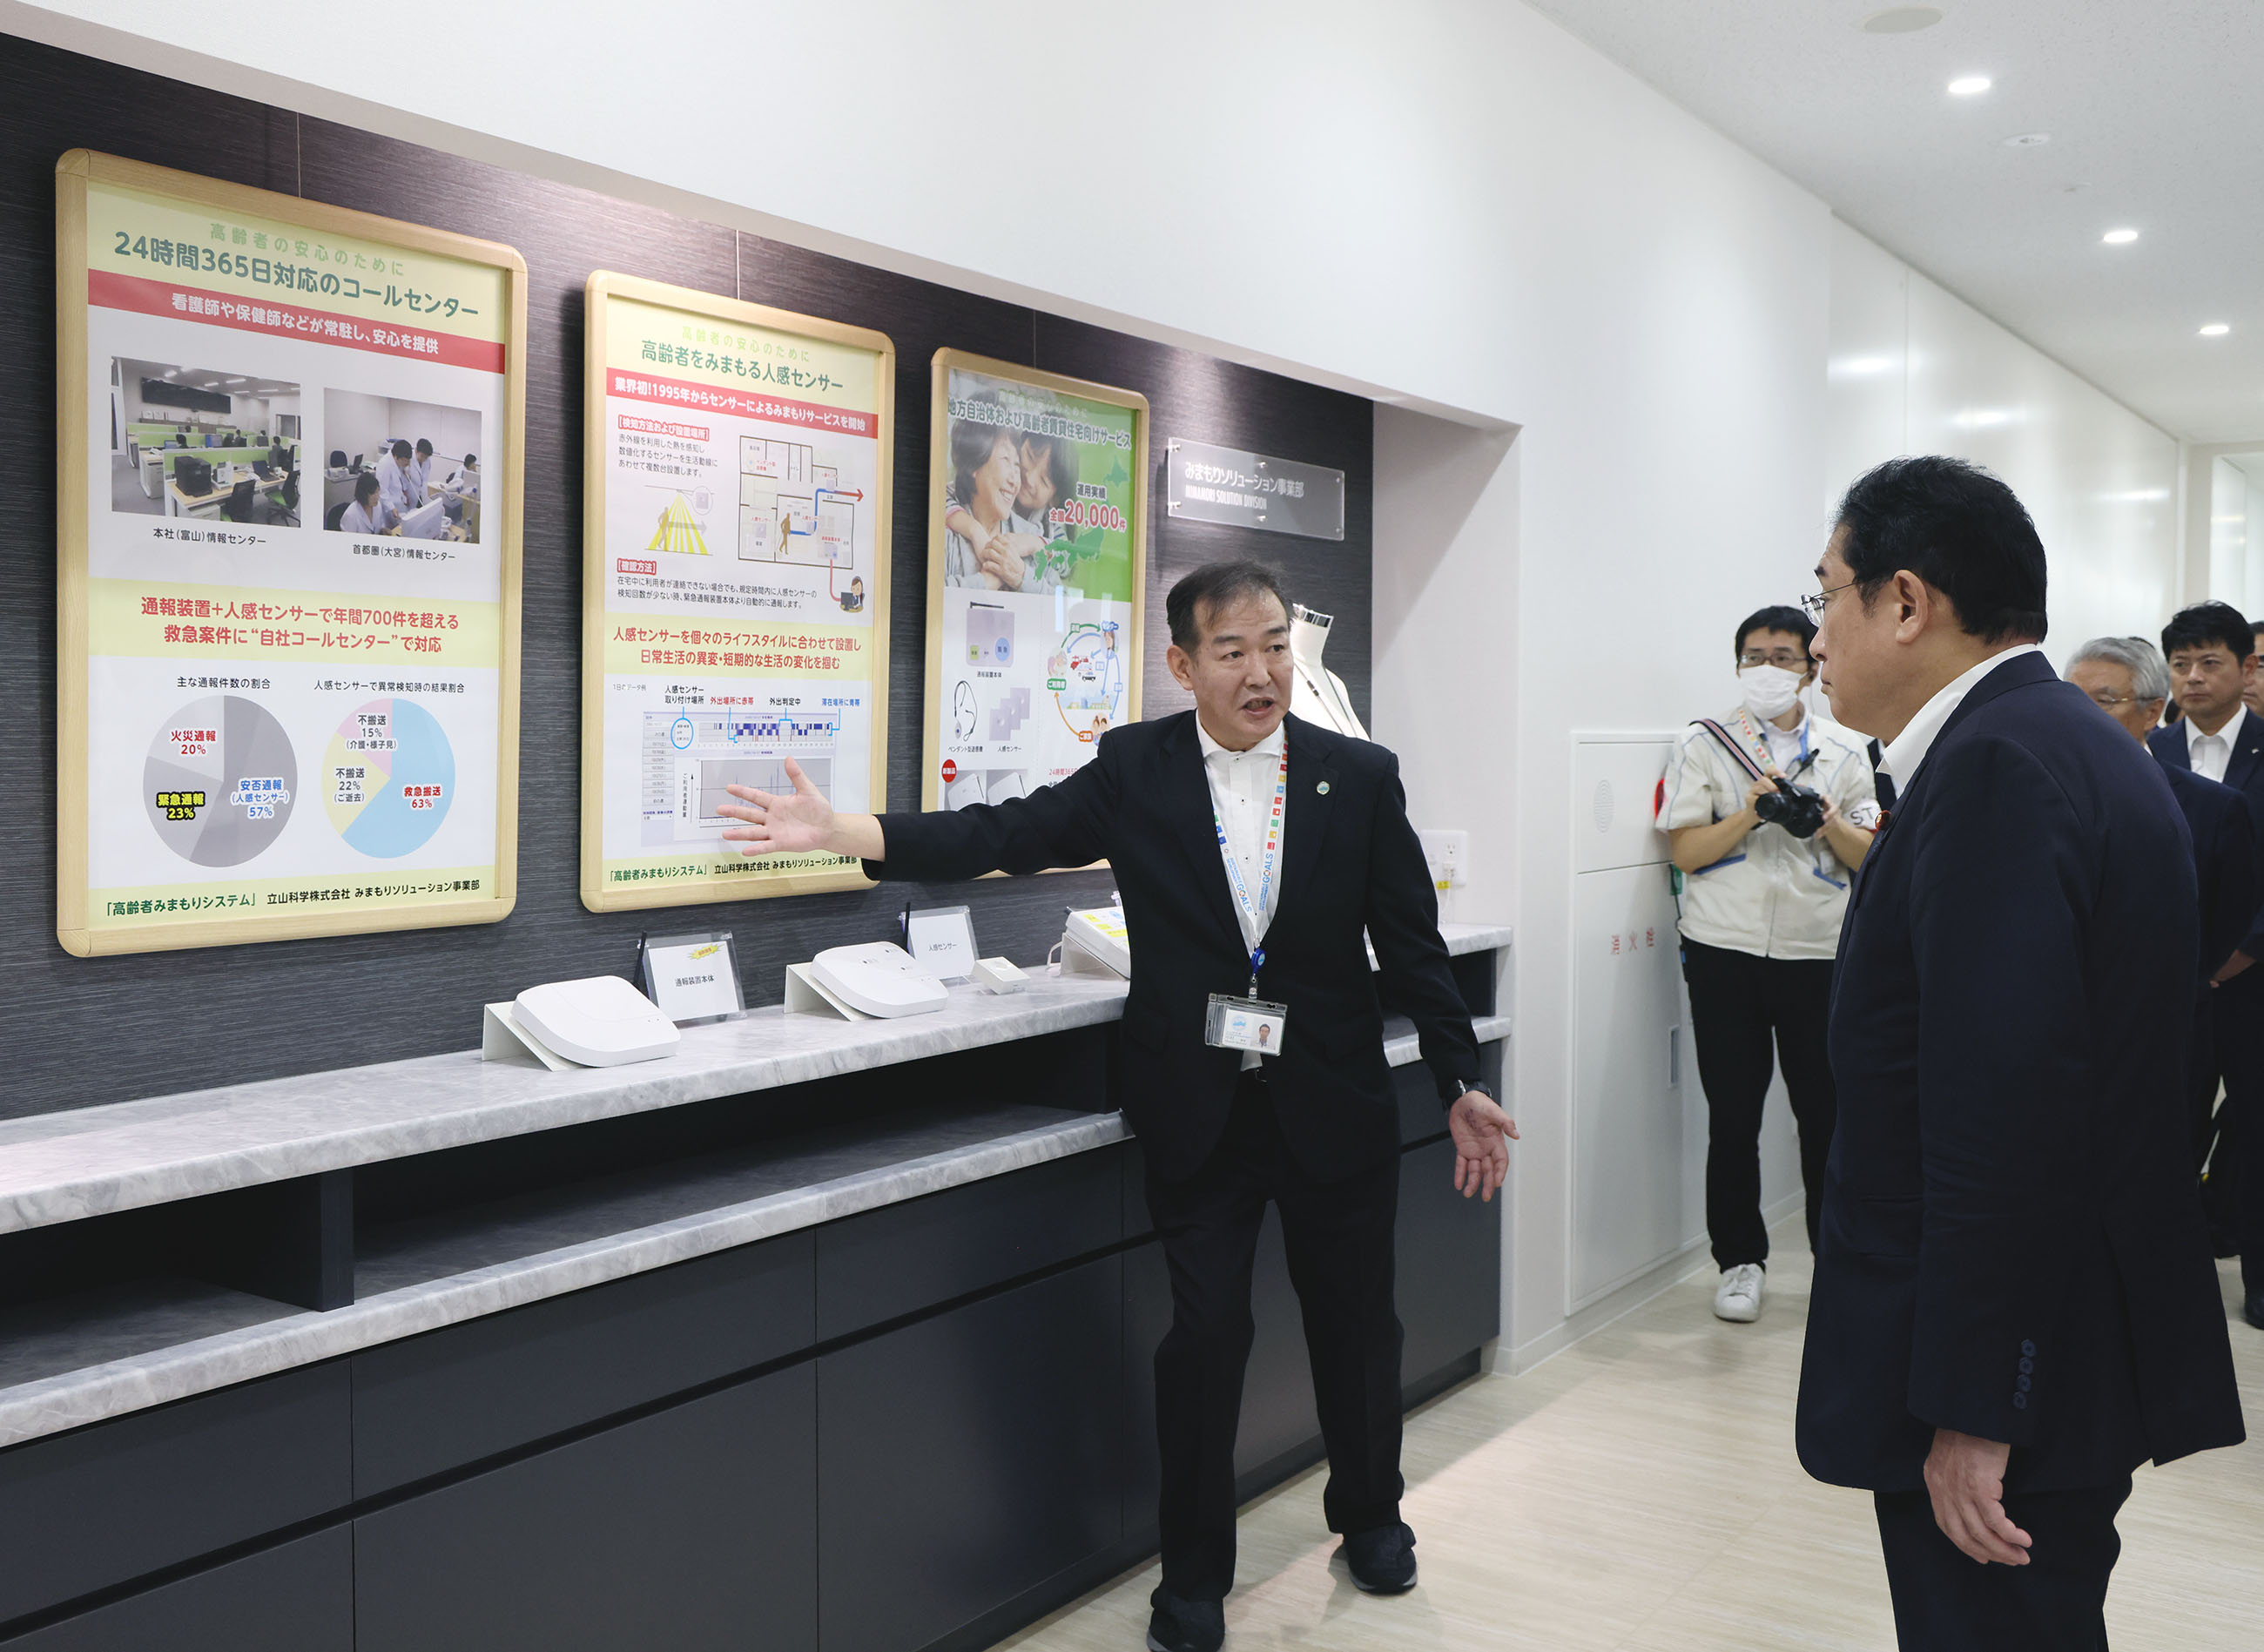 Prime Minister Kishida inspecting a watching service business